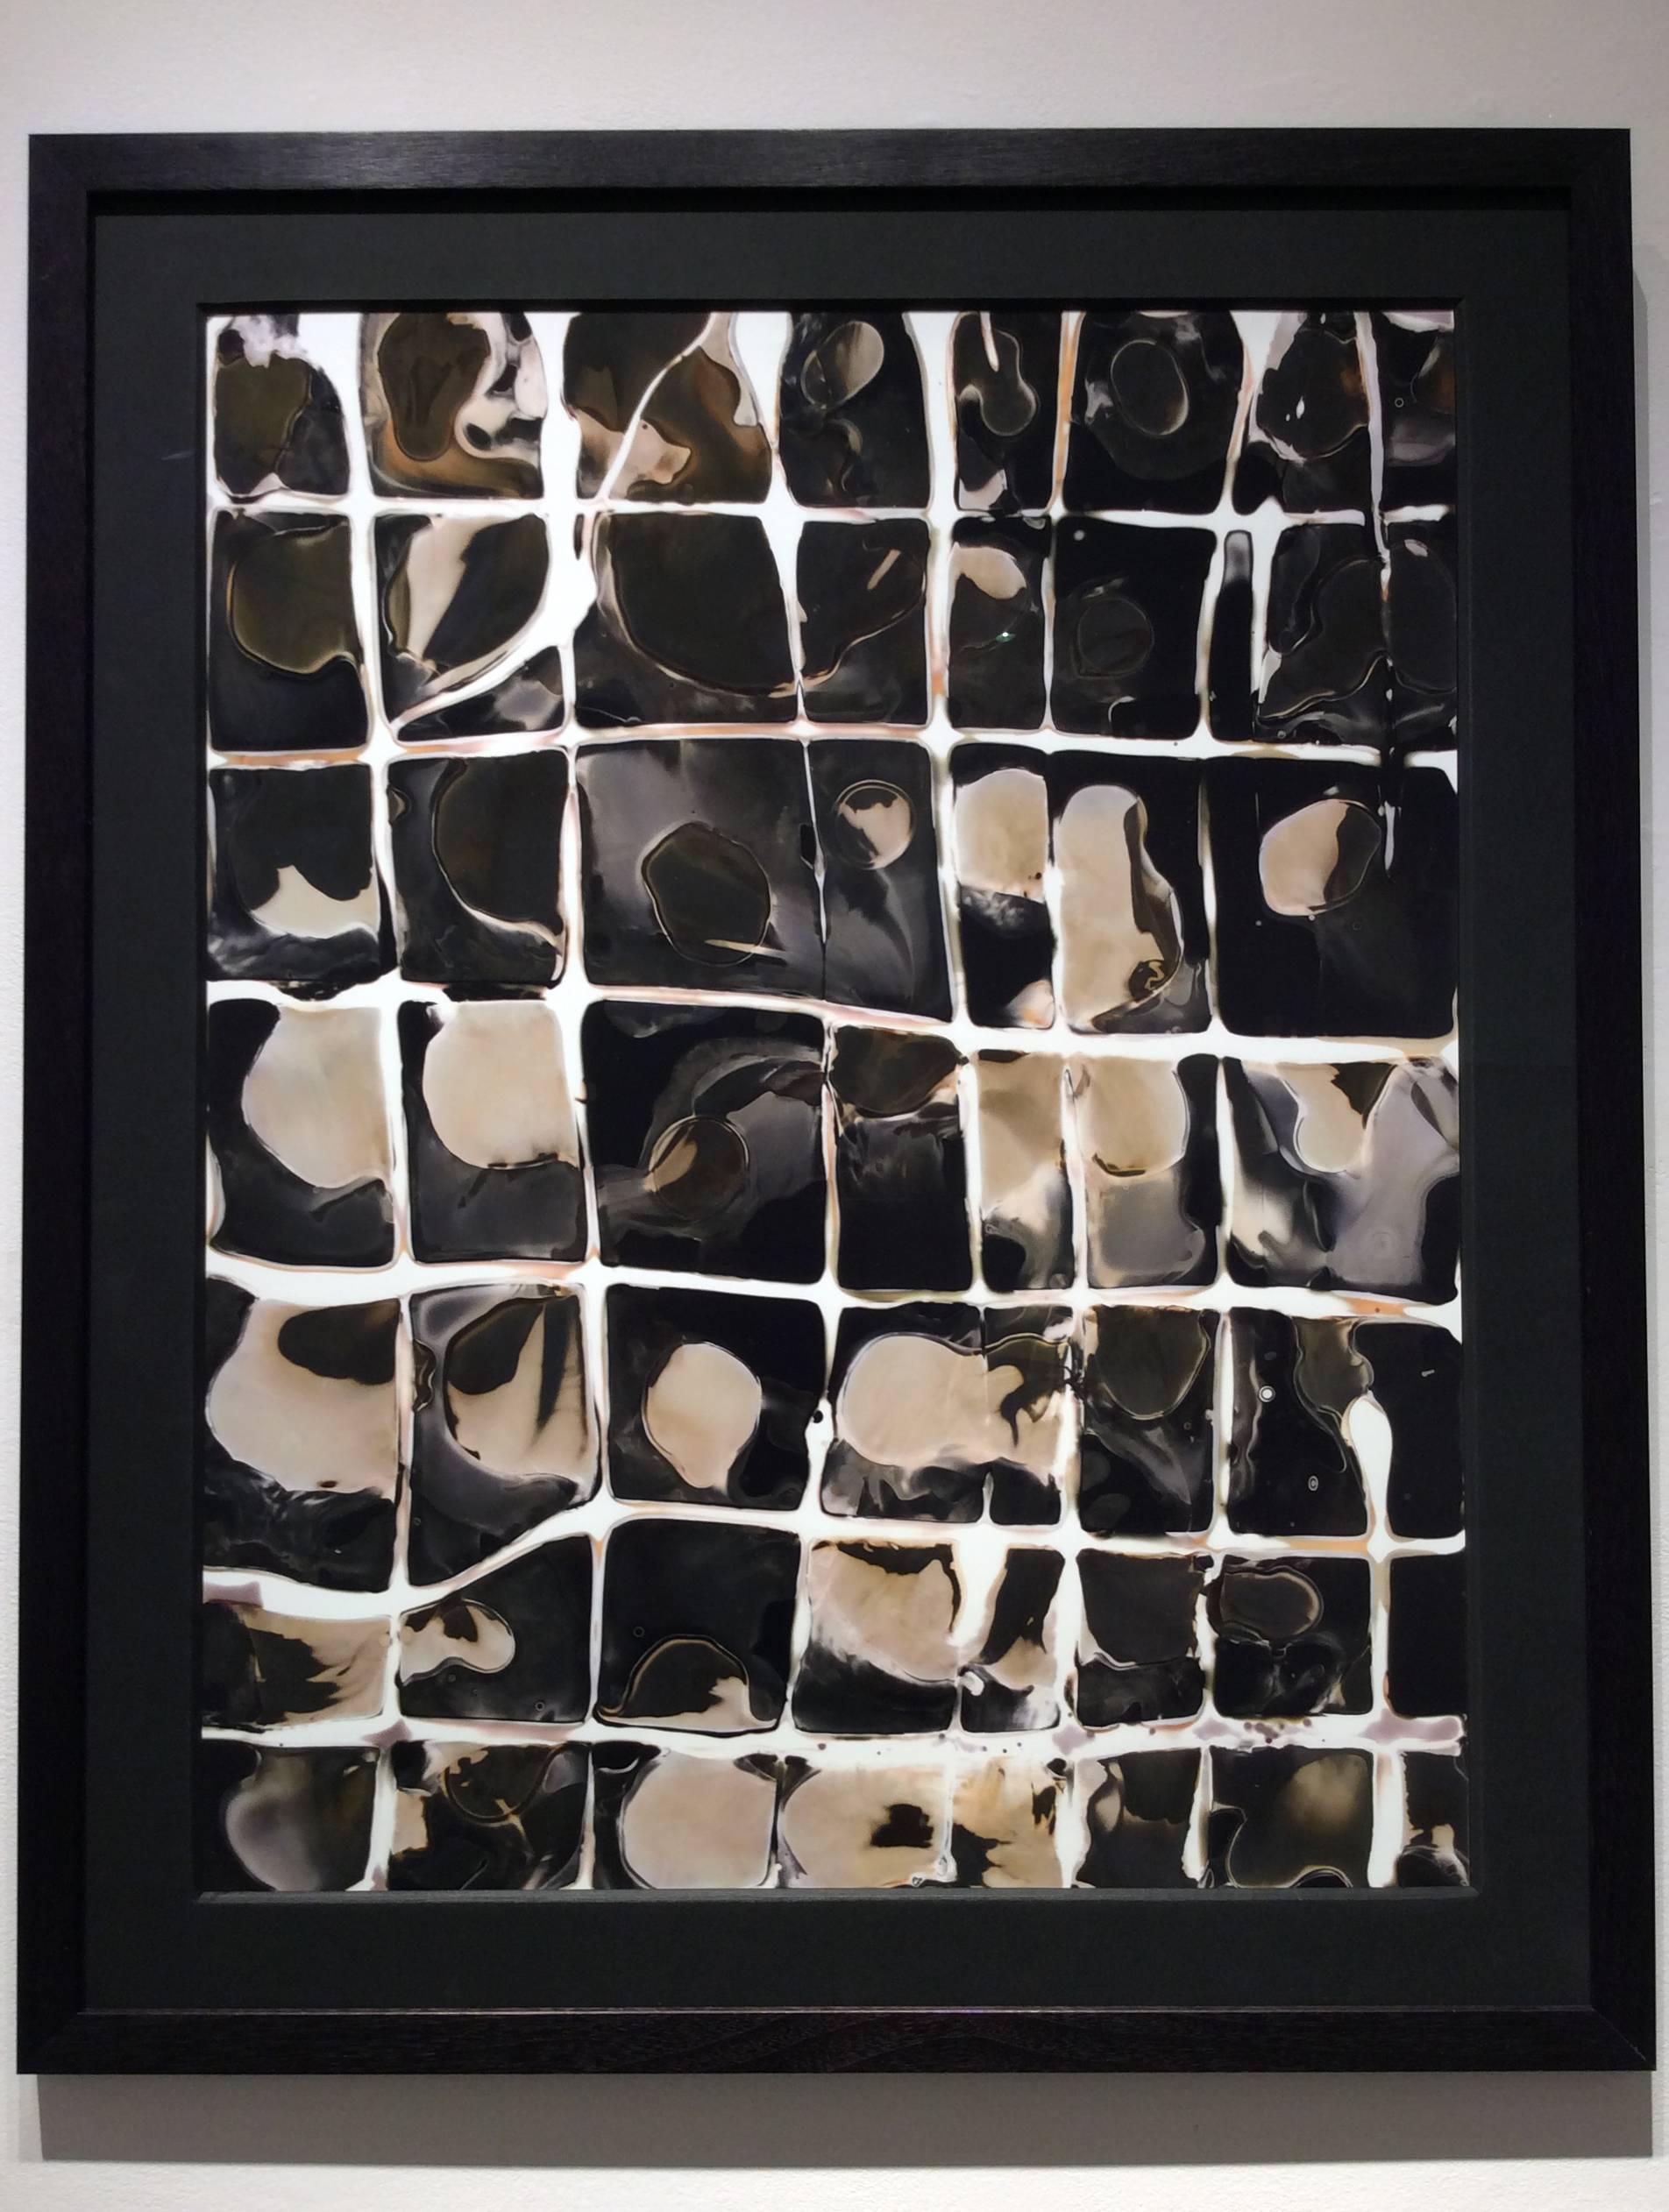 Abstract digital print on black/white photo paper
31.5 x 26.5 inches in custom black stained wood frame with black 8 ply mat and AR non glare glass

These energetic prints are digital copies of original handmade monoprints by photographer Birgit